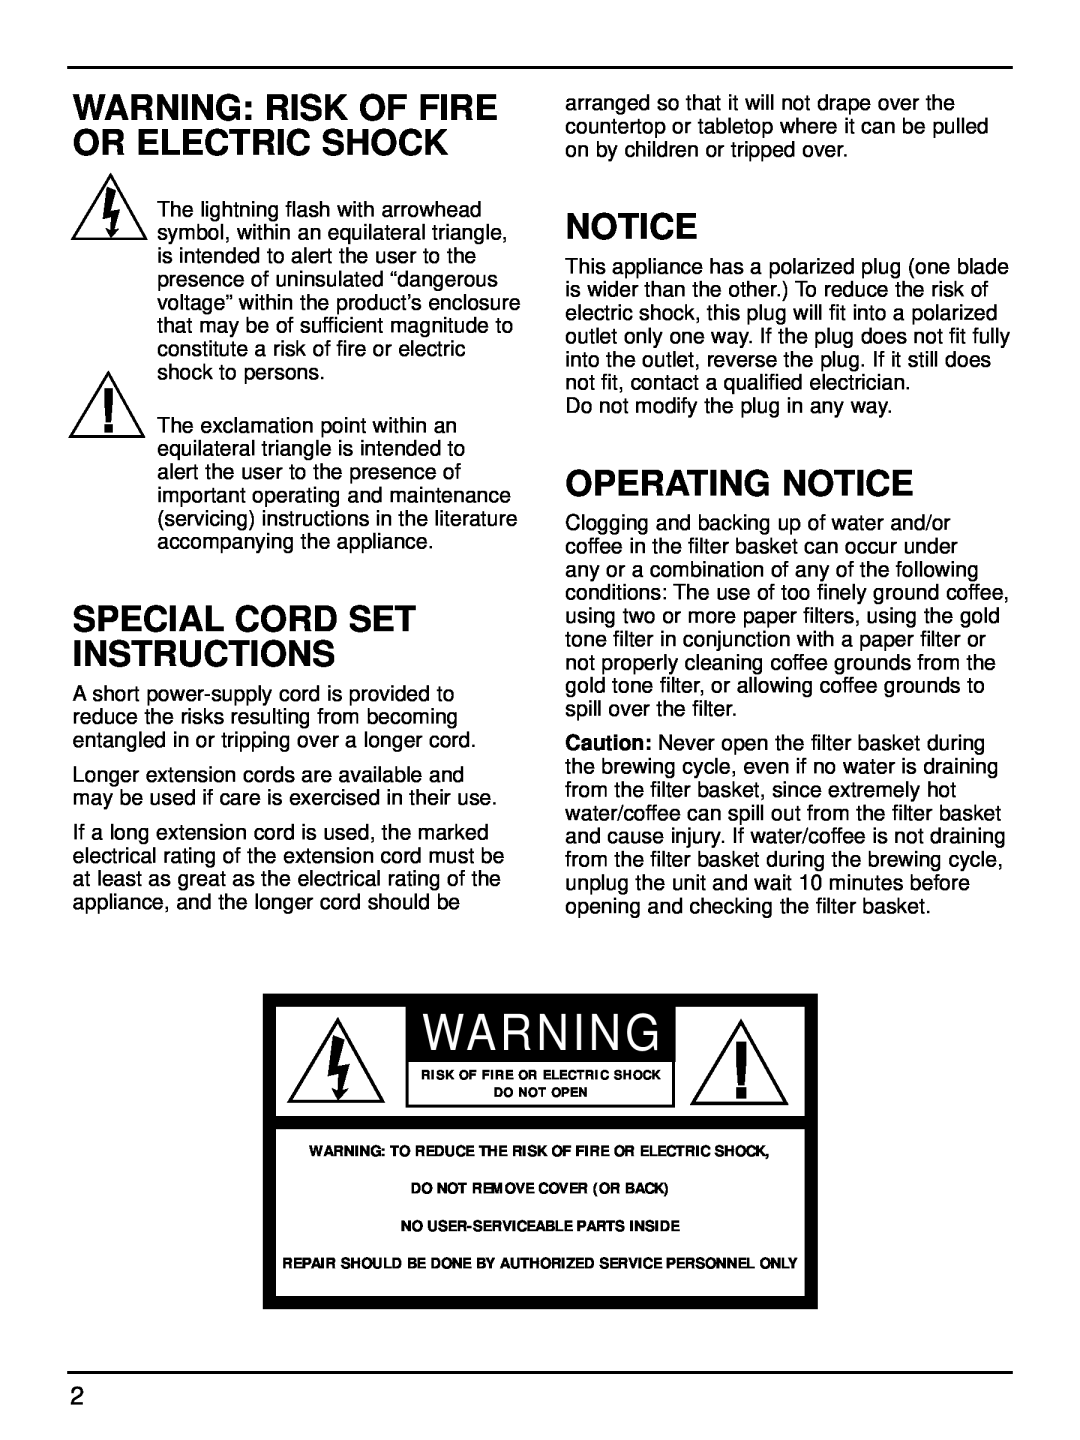 Cuisinart DGB-600 manual Warning Risk Of Fire Or Electric Shock, Special Cord Set Instructions, Operating Notice 